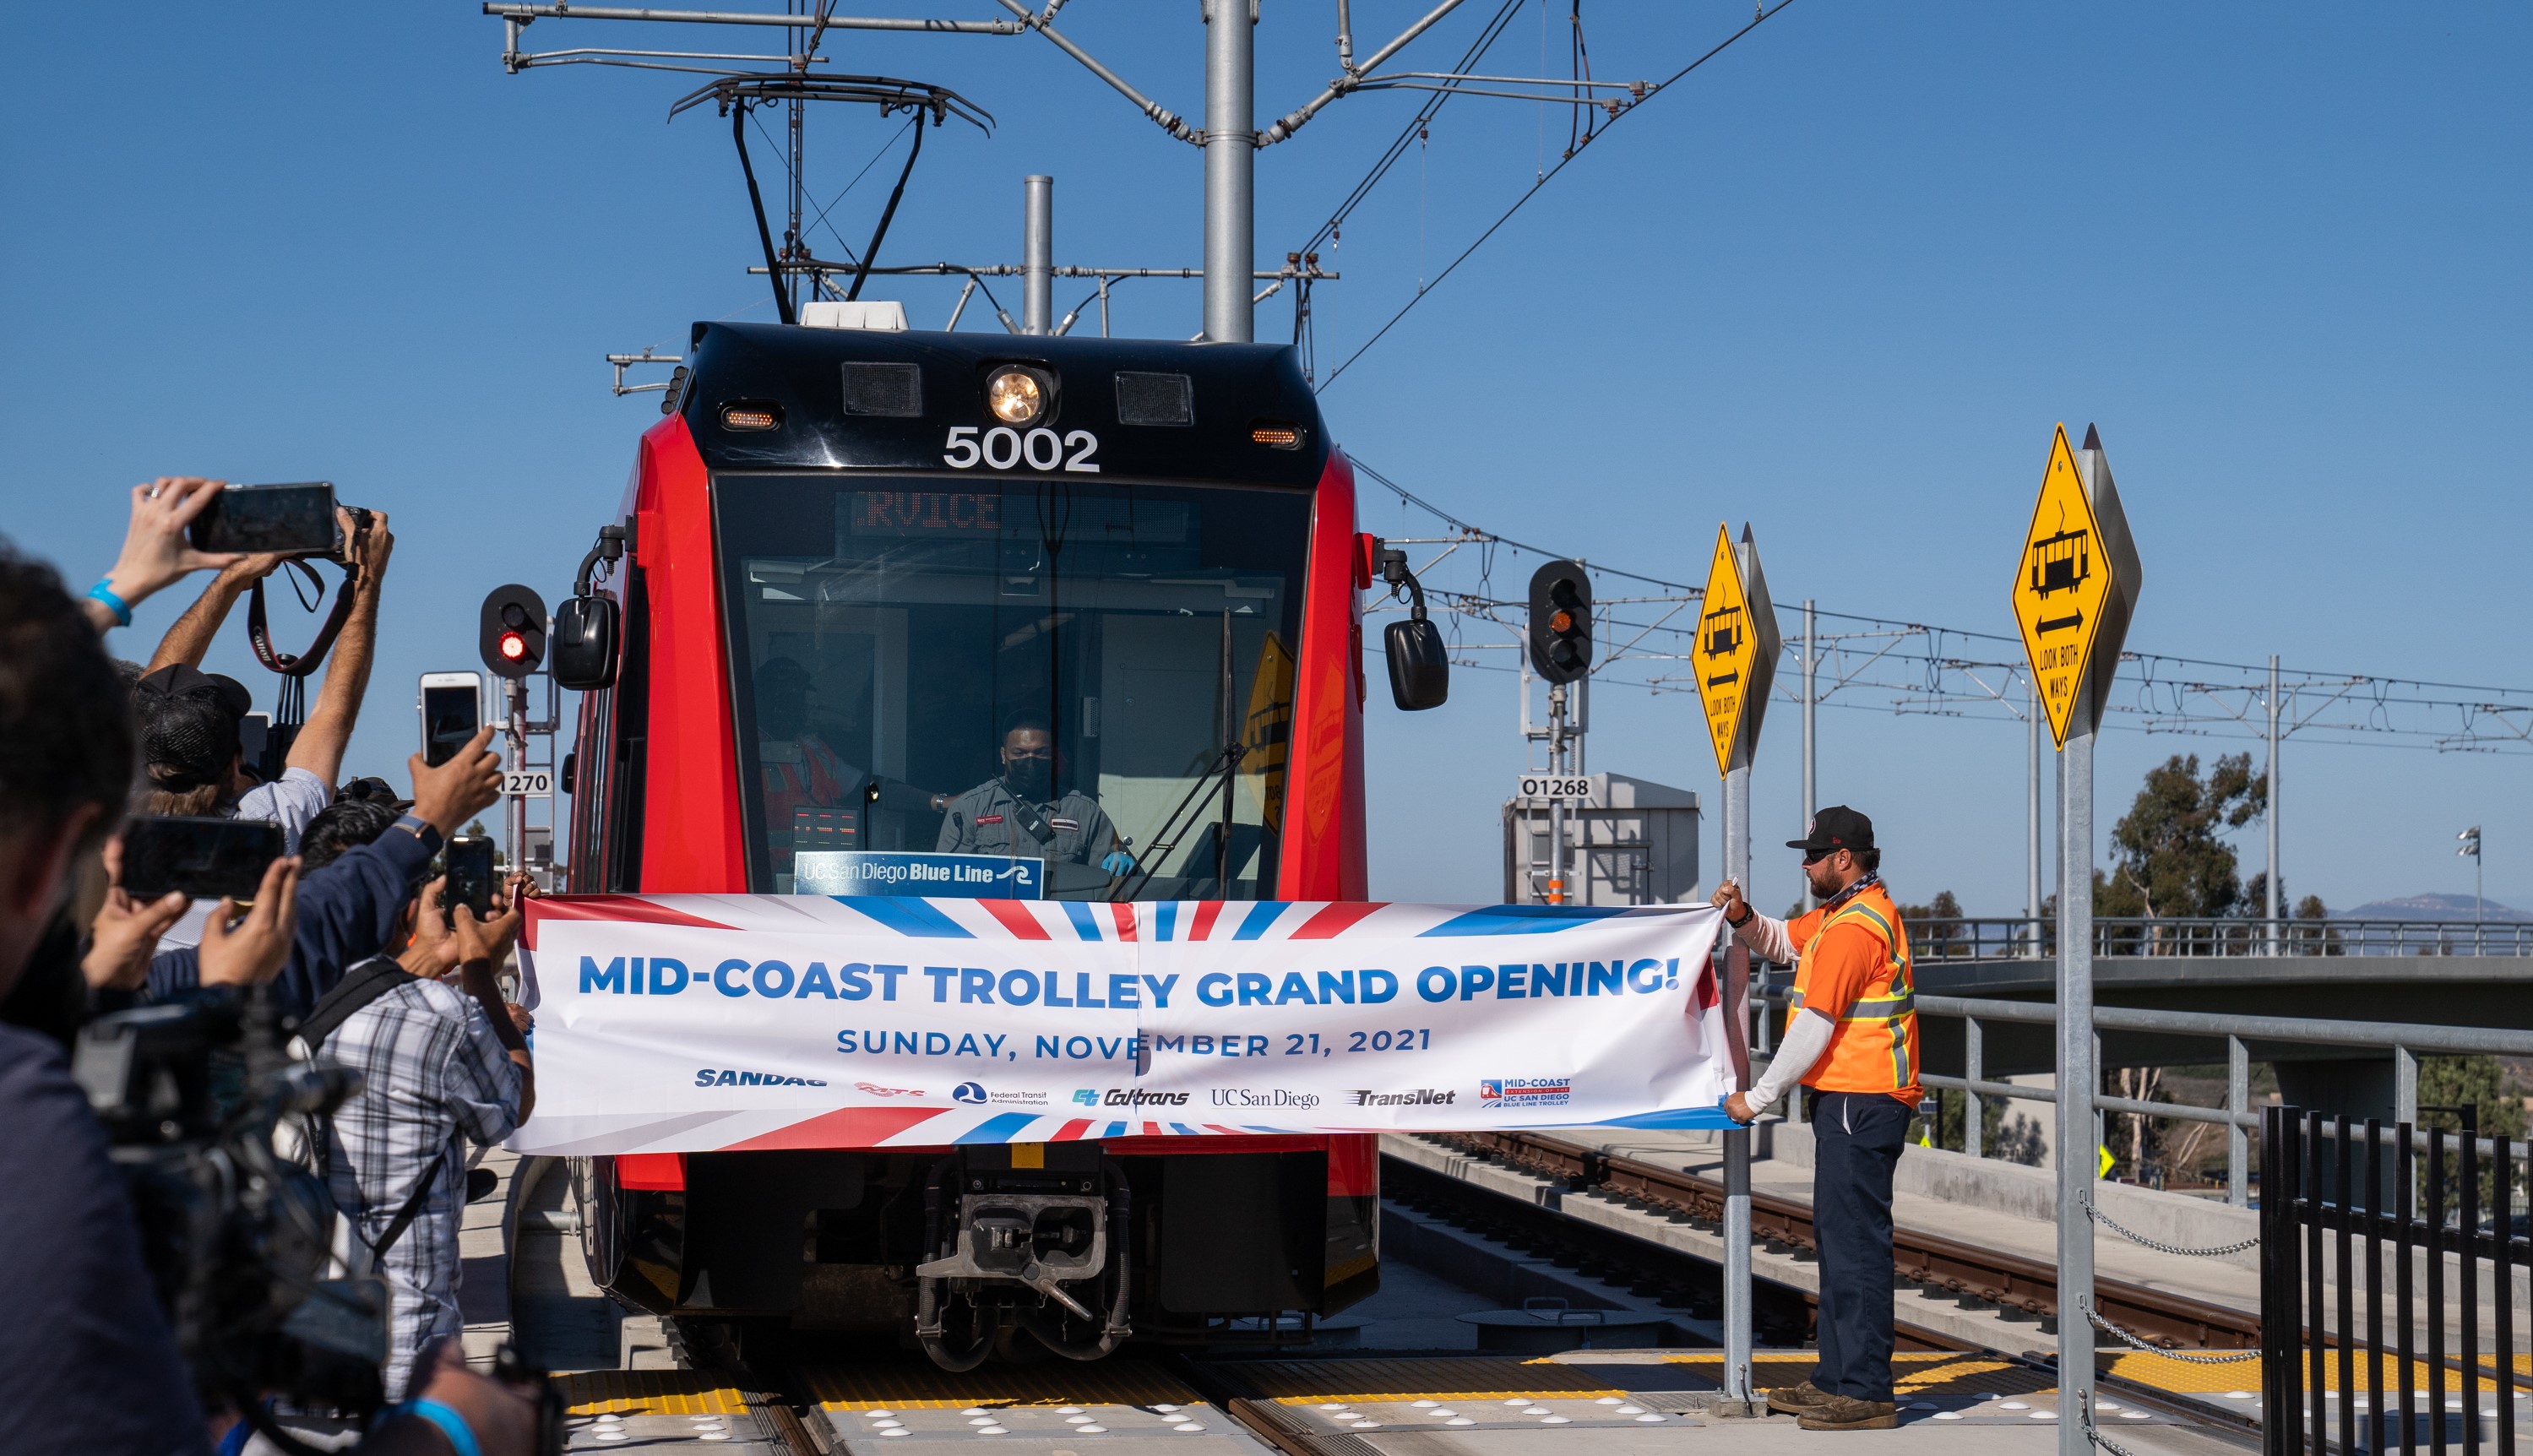 Red Trolley breaking through Mid-Coast Trolley Grand Opening banner while bystanders cheer and take pictures